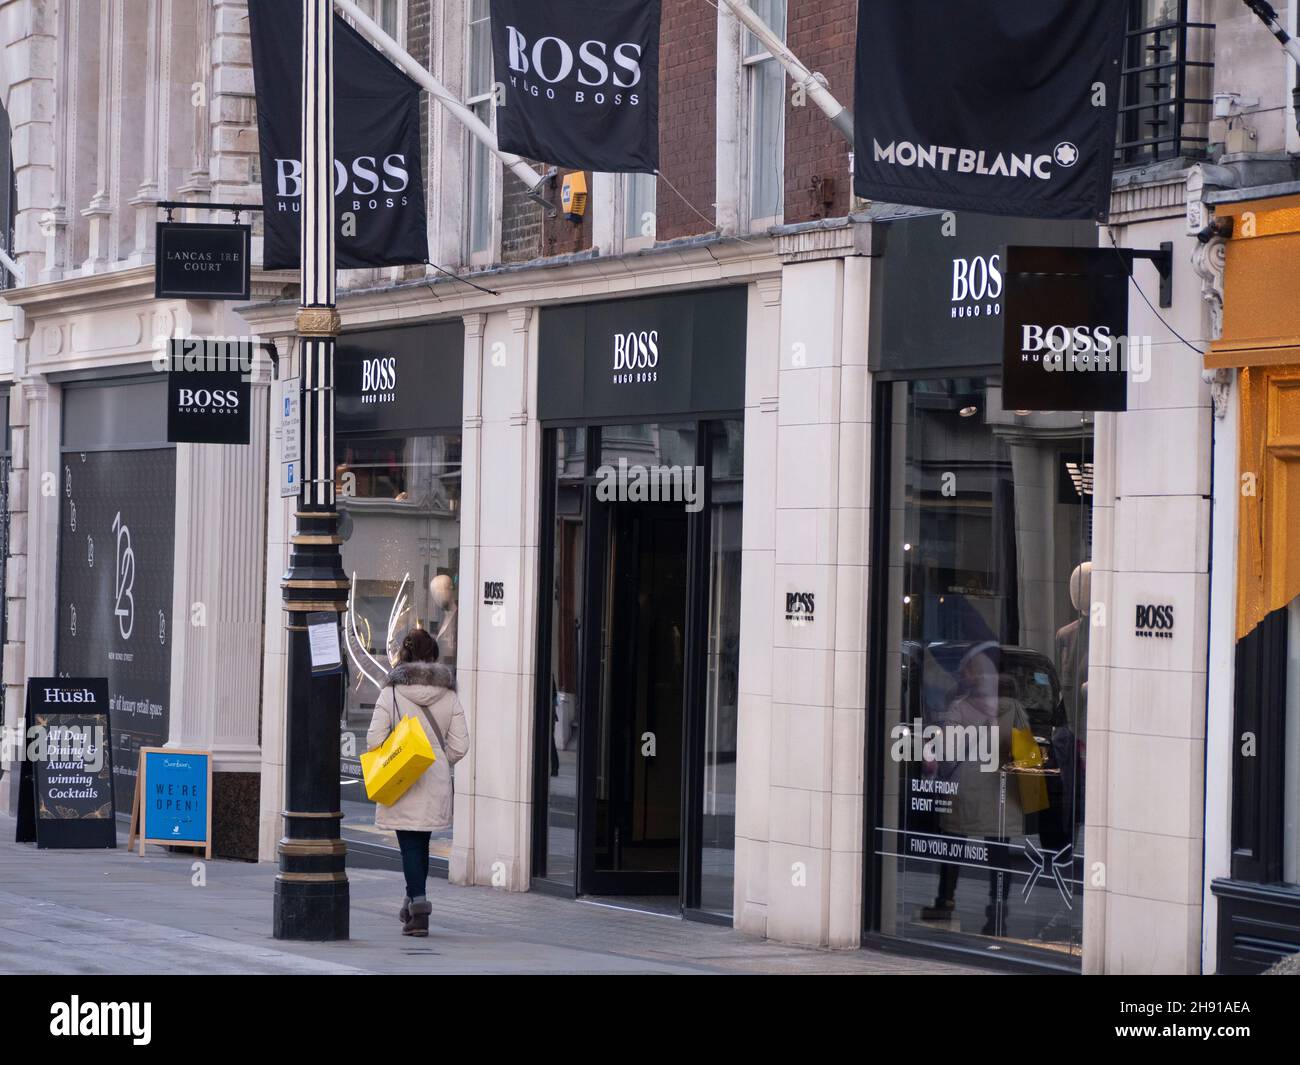 Hugo Boss Outlet High Resolution Stock Photography and Images - Alamy